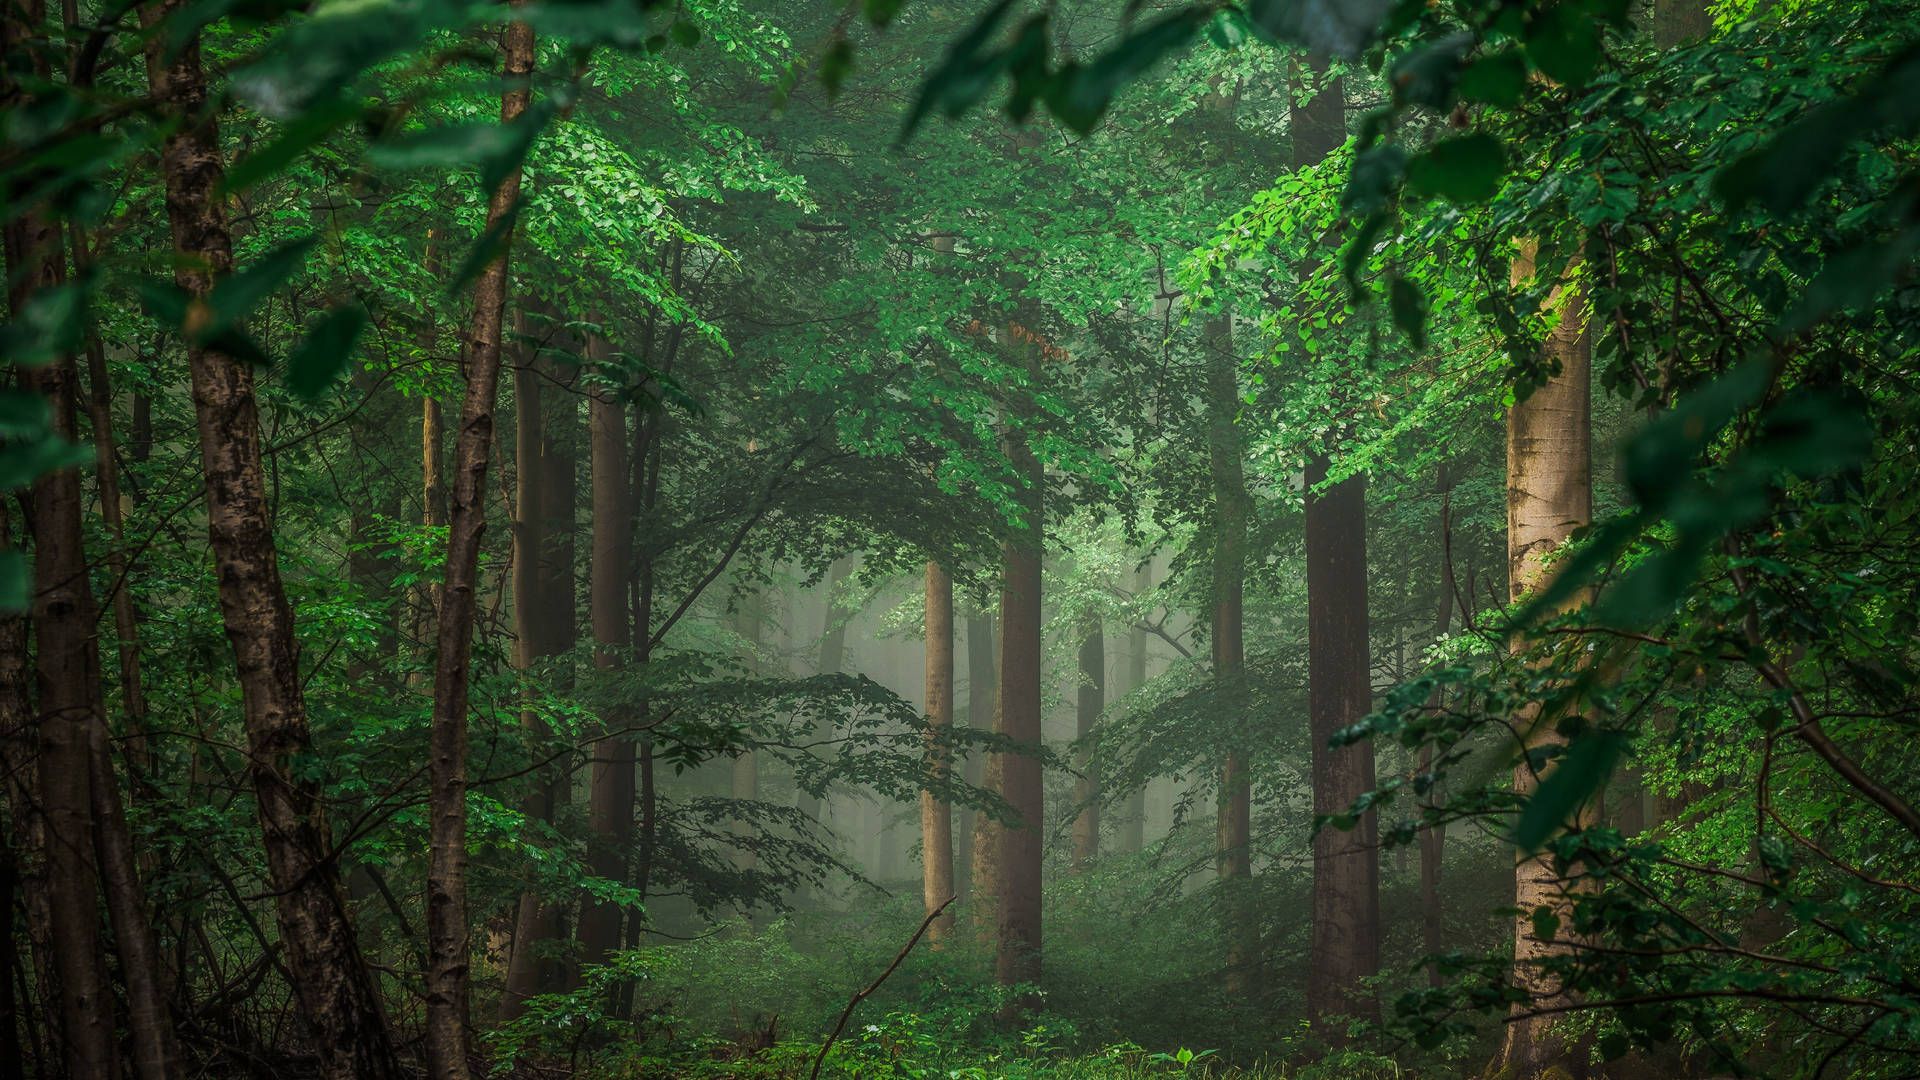 A dense forest with green leaves and fog. - Woods